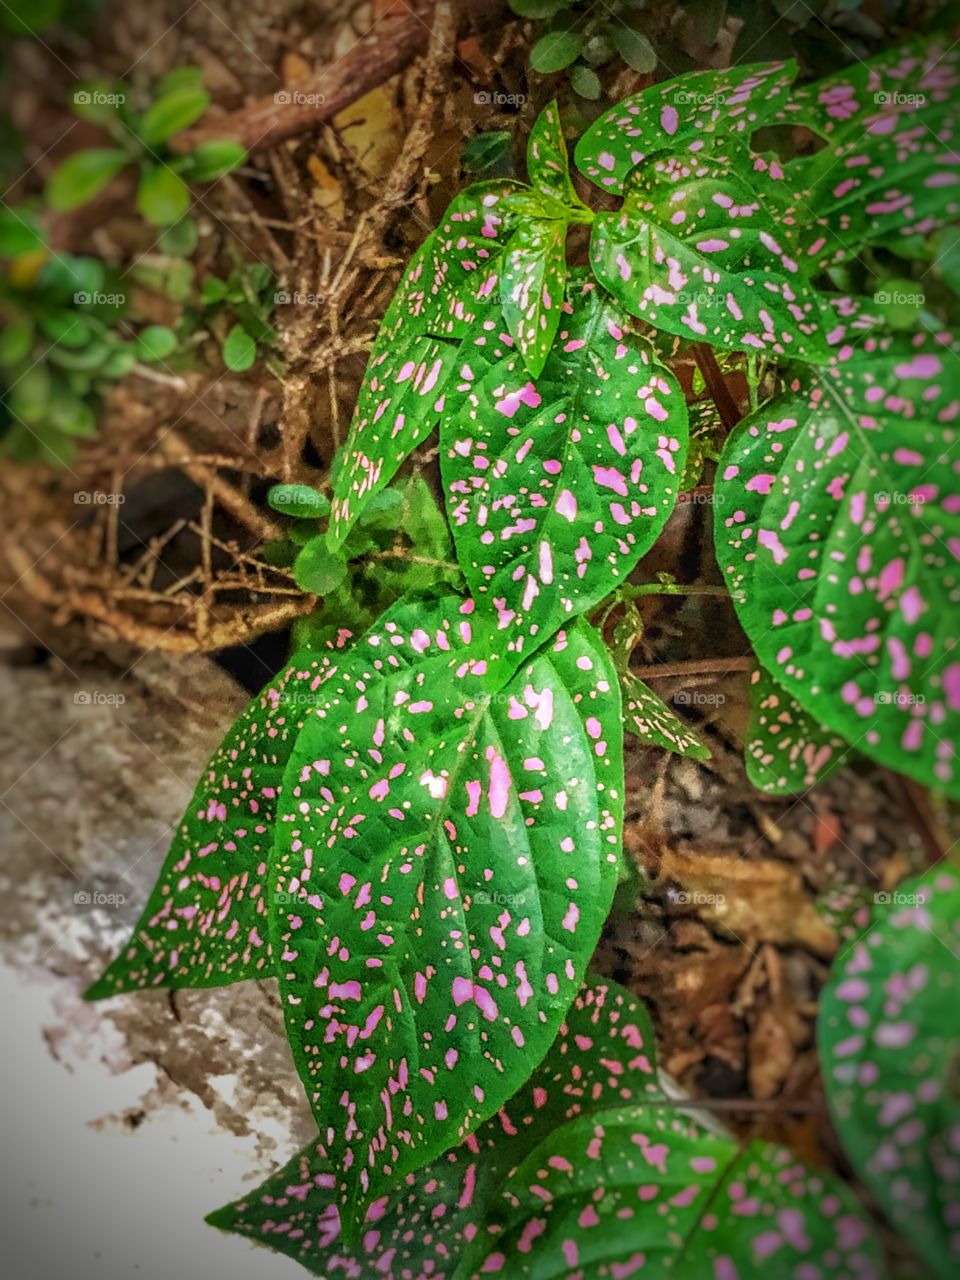 Green leaves with pink dots in the garden. It is called Araceae. It has a beautiful flower too, but even the leaves are different and beautiful, and deserve to be noticed.